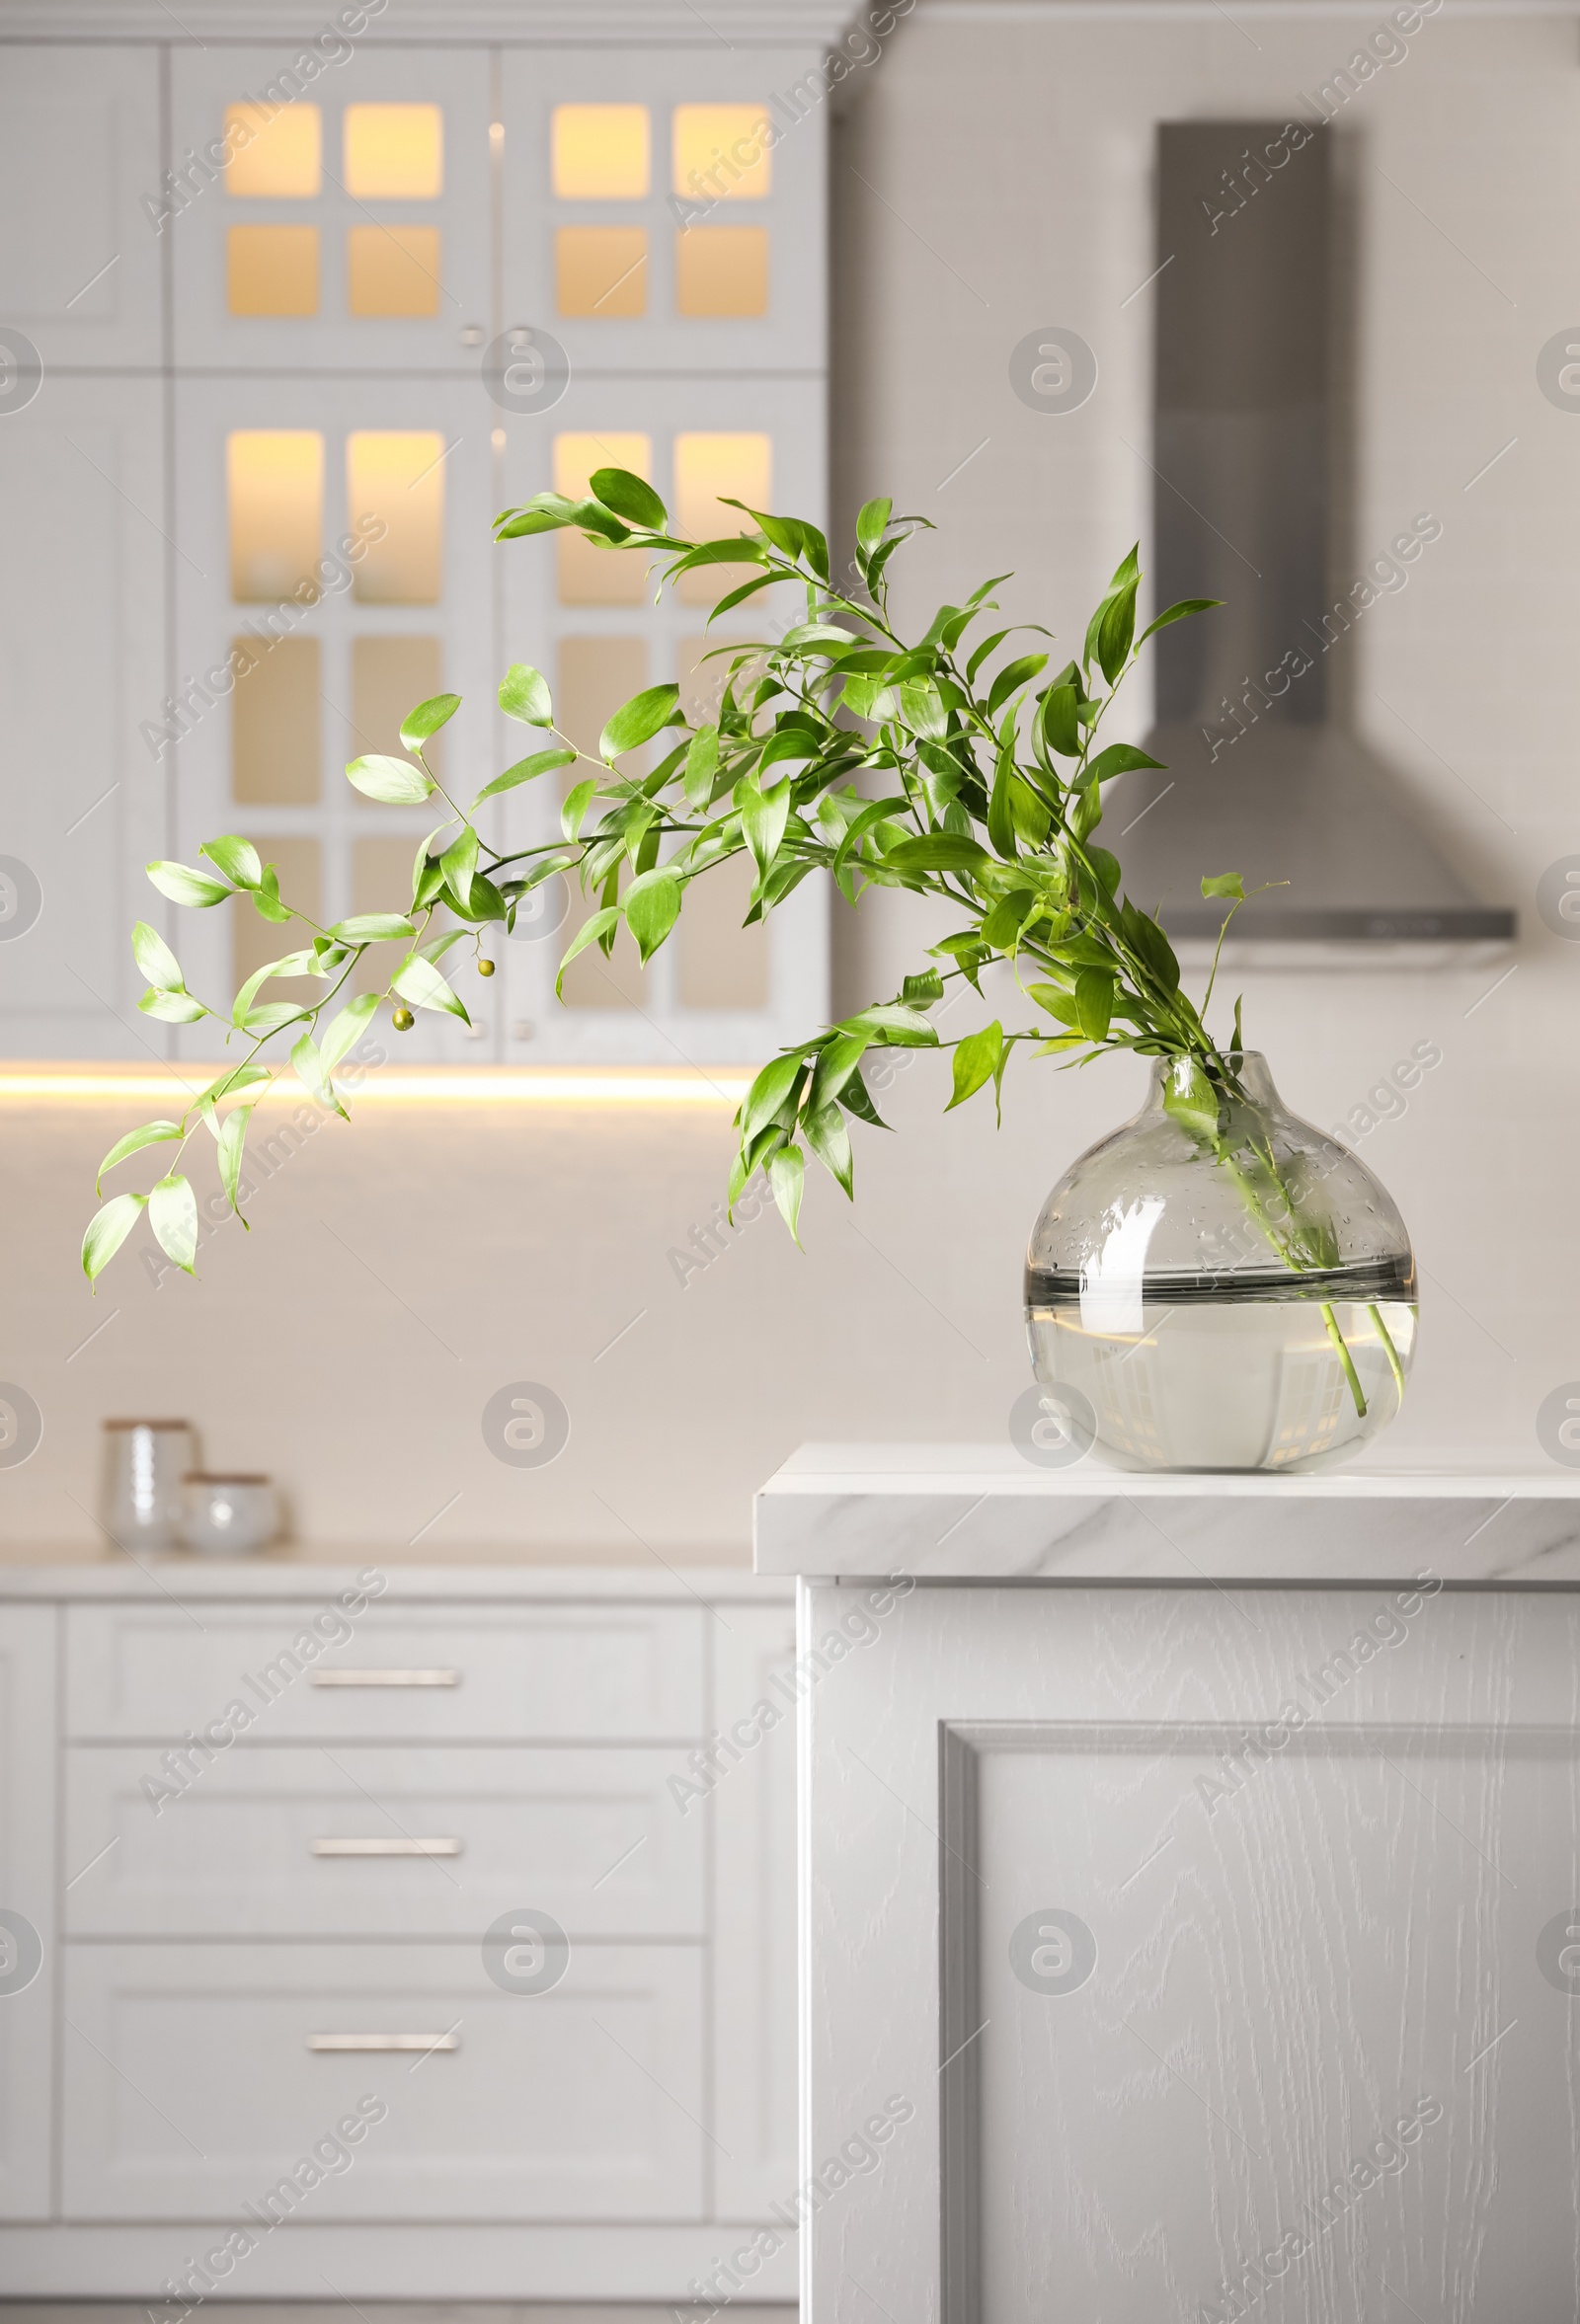 Photo of Decorative vase with branch on table in kitchen